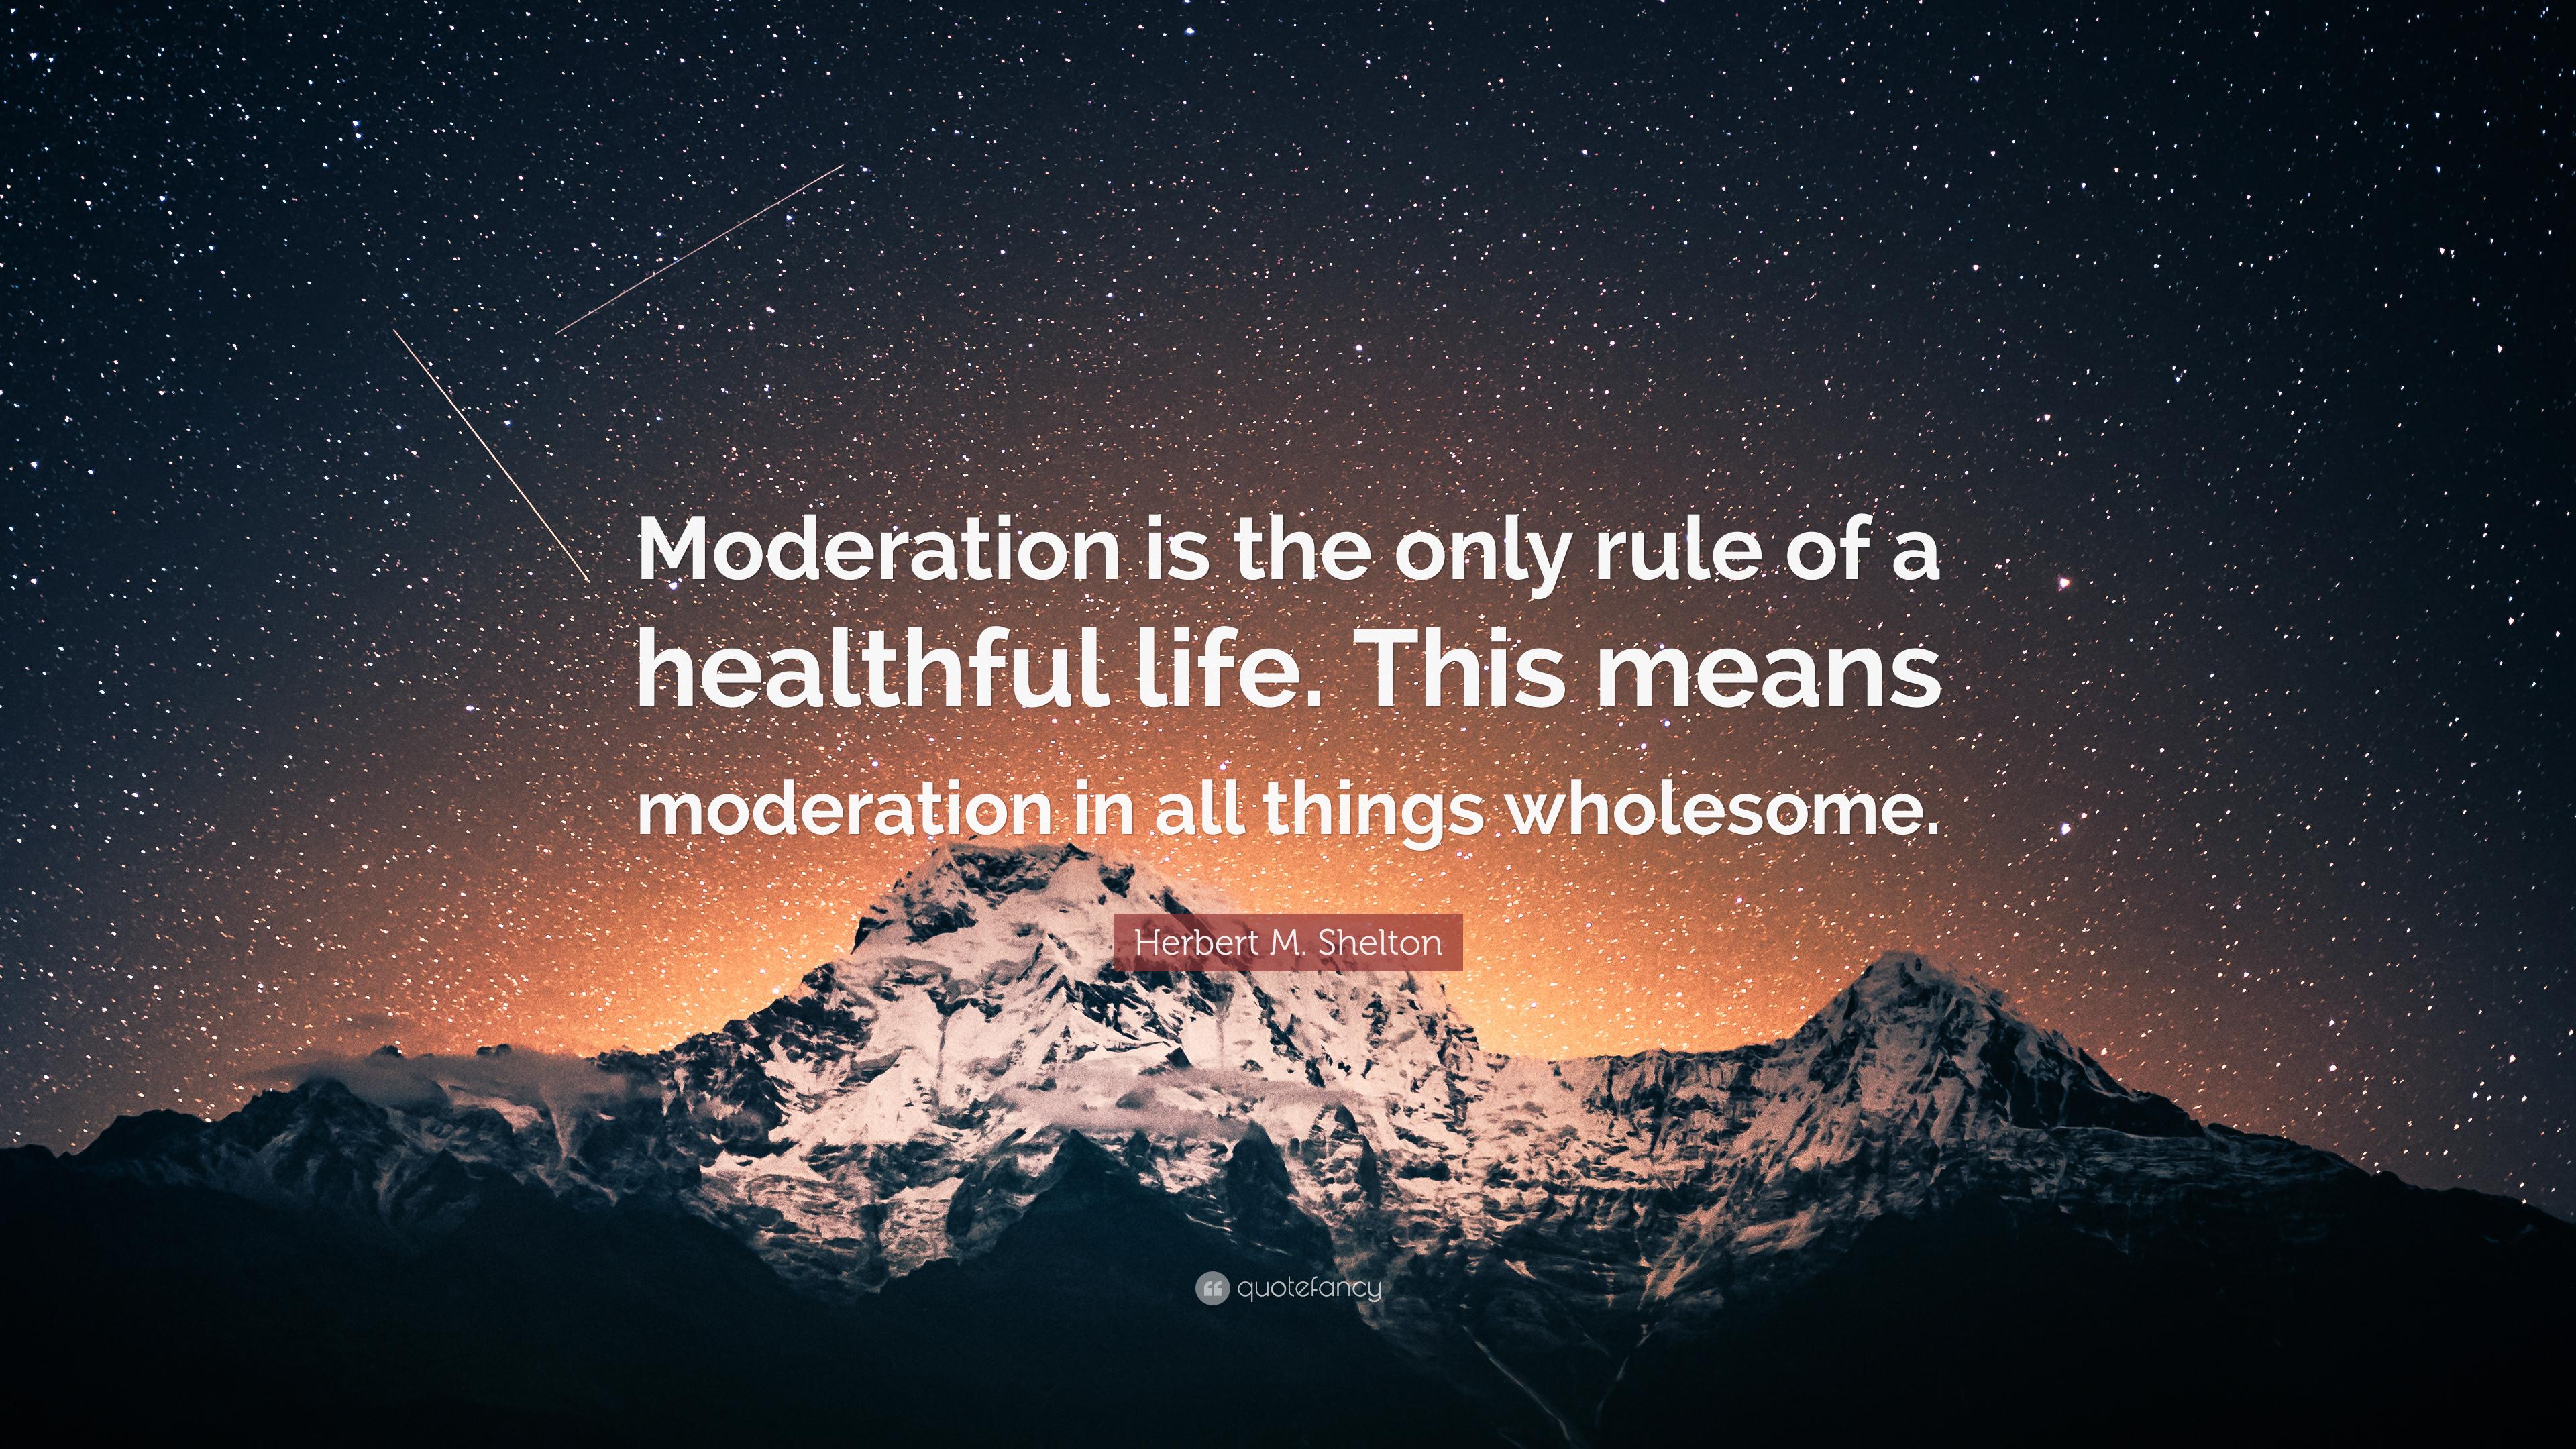 Herbert M. Shelton Quote: “Moderation is the only rule of a